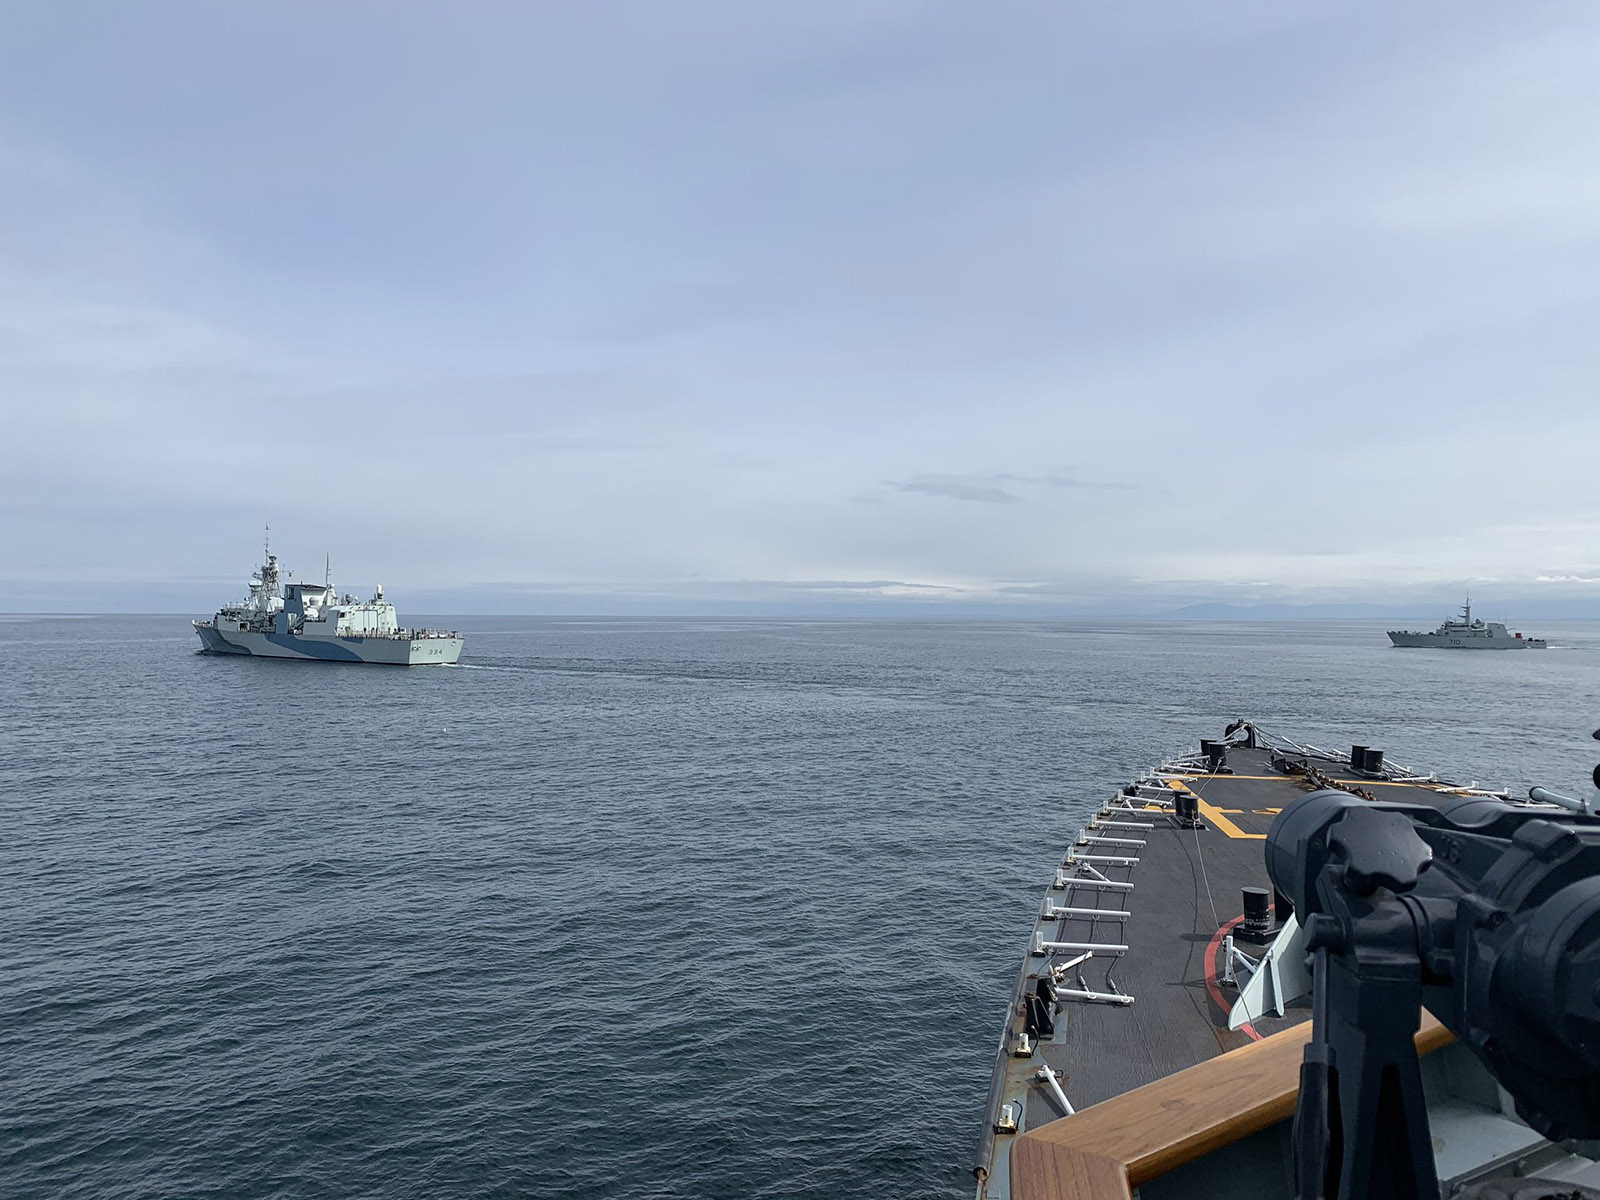 HMCS Calgary takes station on HMCS Regina as HMCS Brandon also manoeuvres into position for a Replenishment at Sea (RAS) Approaches exercise. The ships  are currently participating in Task Group Exercise (TGEX) 20-1 off the coast of Vancouver Island, supporting HMCS Calgary as it conduct High Readiness Work Ups in preparation for a deployment to the Asia-Pacific later this Spring.